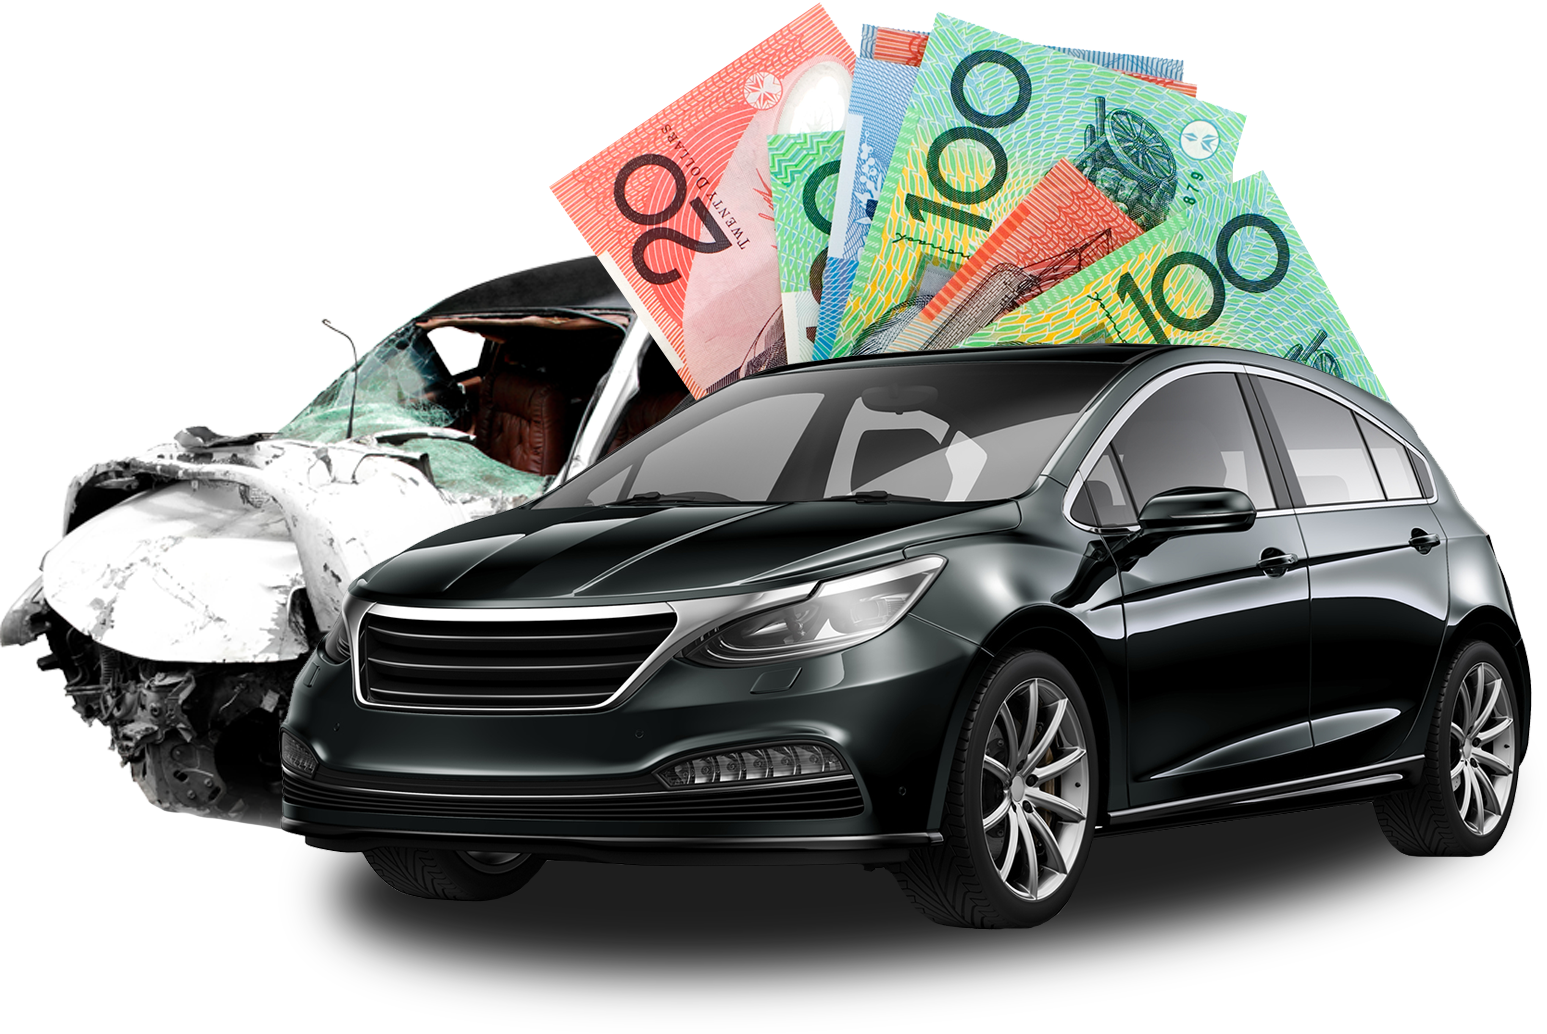 Instant Cash for Cars Sydney | Earn Top Cash For Cars